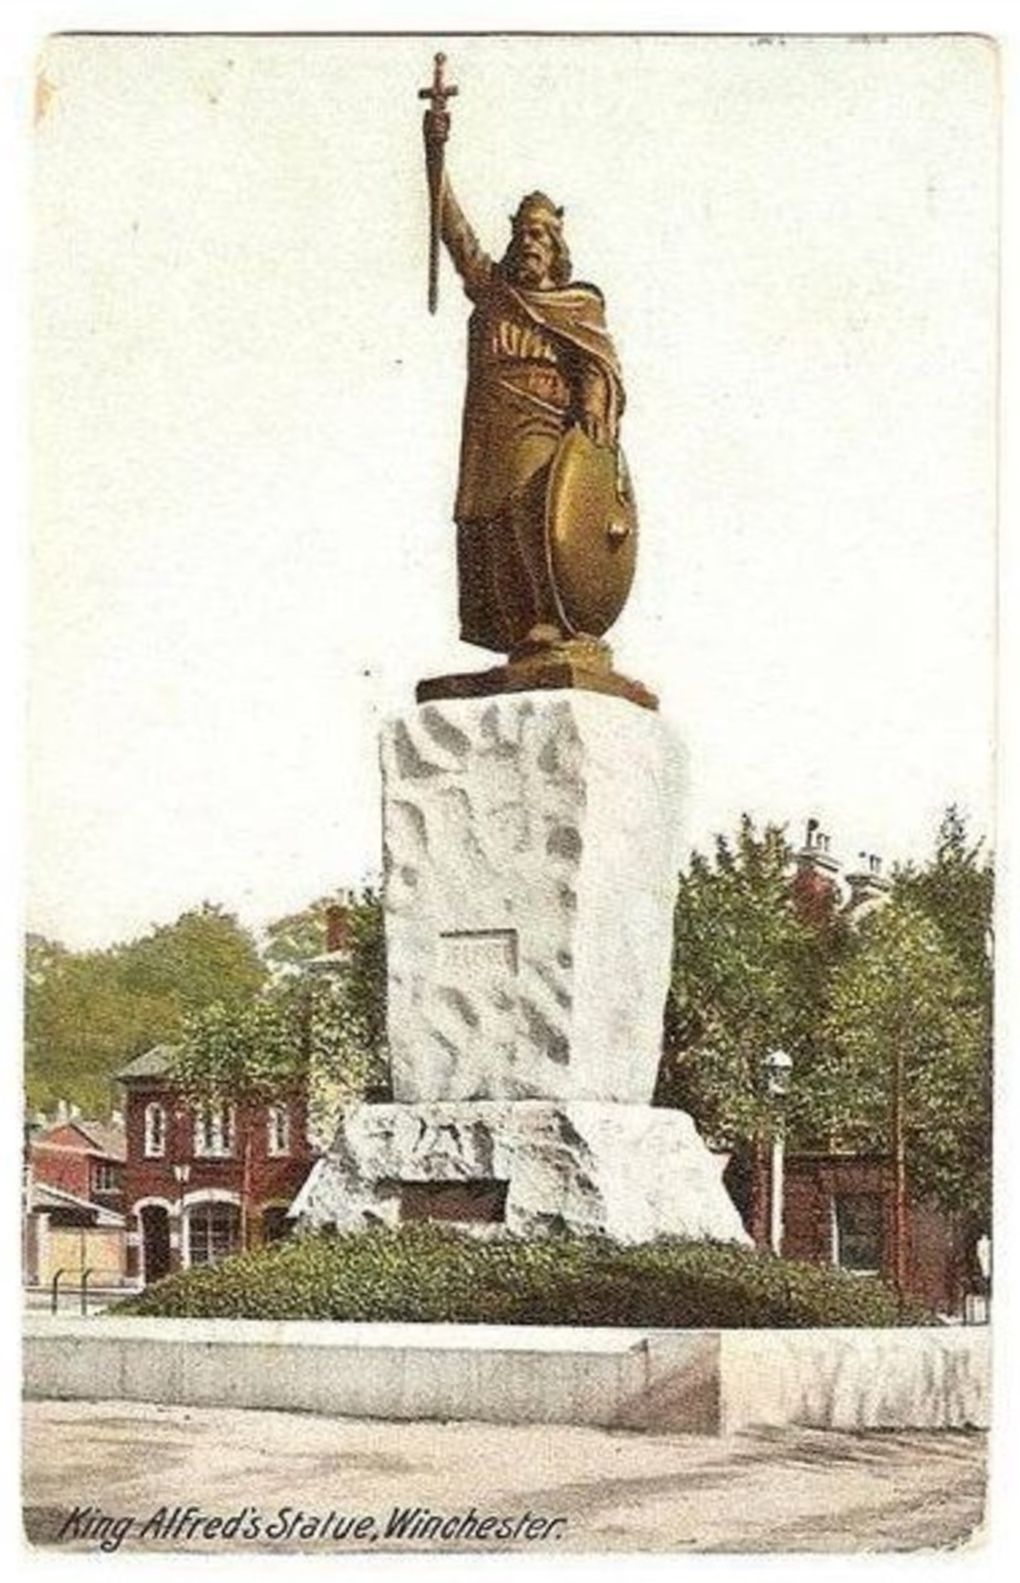 King Alfreds Statue Winchester, Hampshire. Early 1900s Postcard